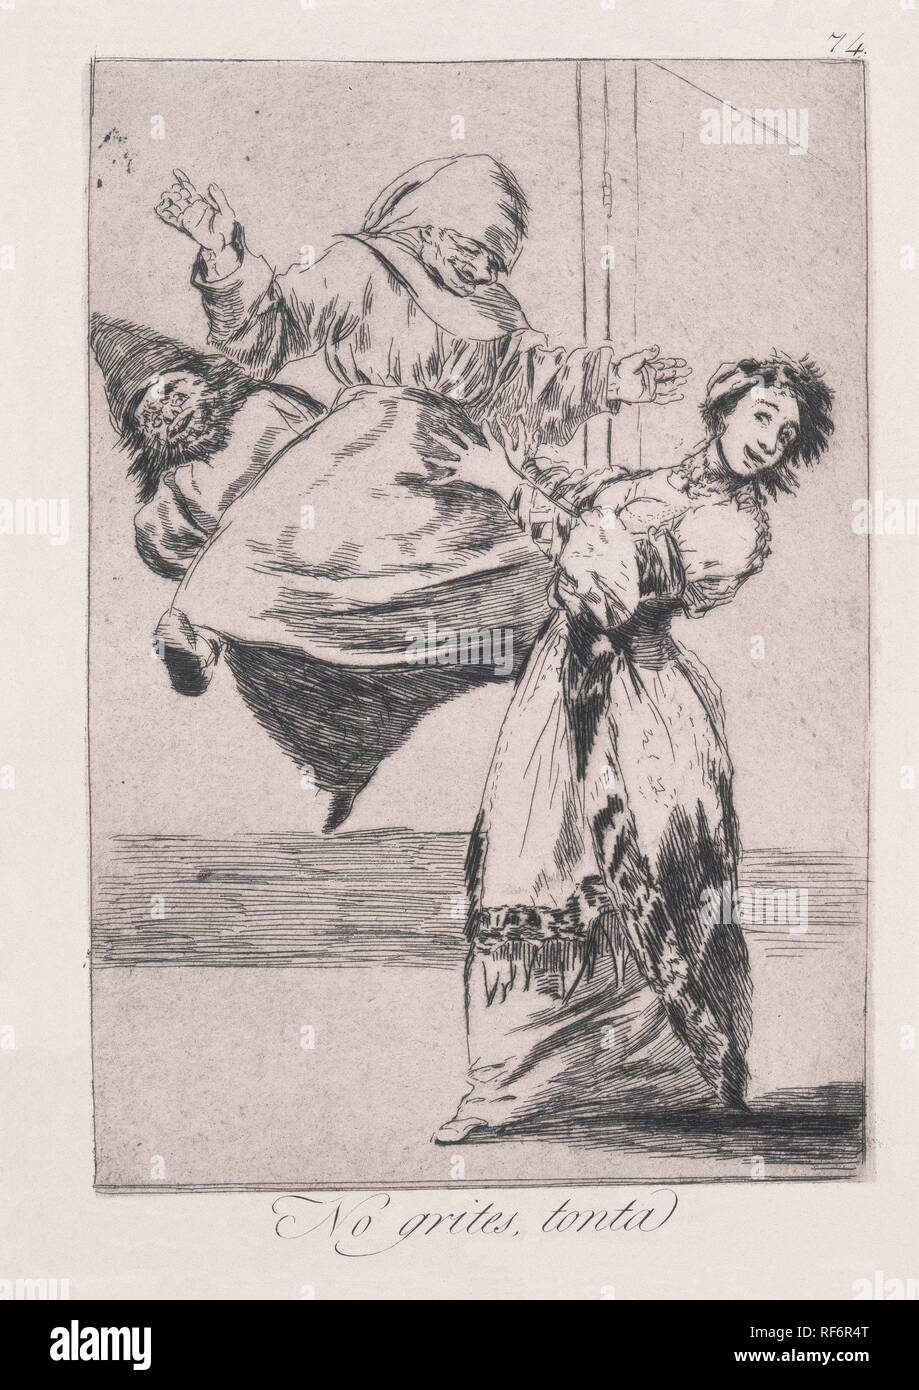 The Caprices, plate 74. 'Don't scream, stupid (No grites, tonta)', 1799, Etching, burnished aquatint and burin on laid paper, 21,8 x 15,2 cm. Author: GOYA, FRANCISCO DE. Location: BIBLIOTECA NACIONAL-COLECCION. MADRID. SPAIN. Stock Photo